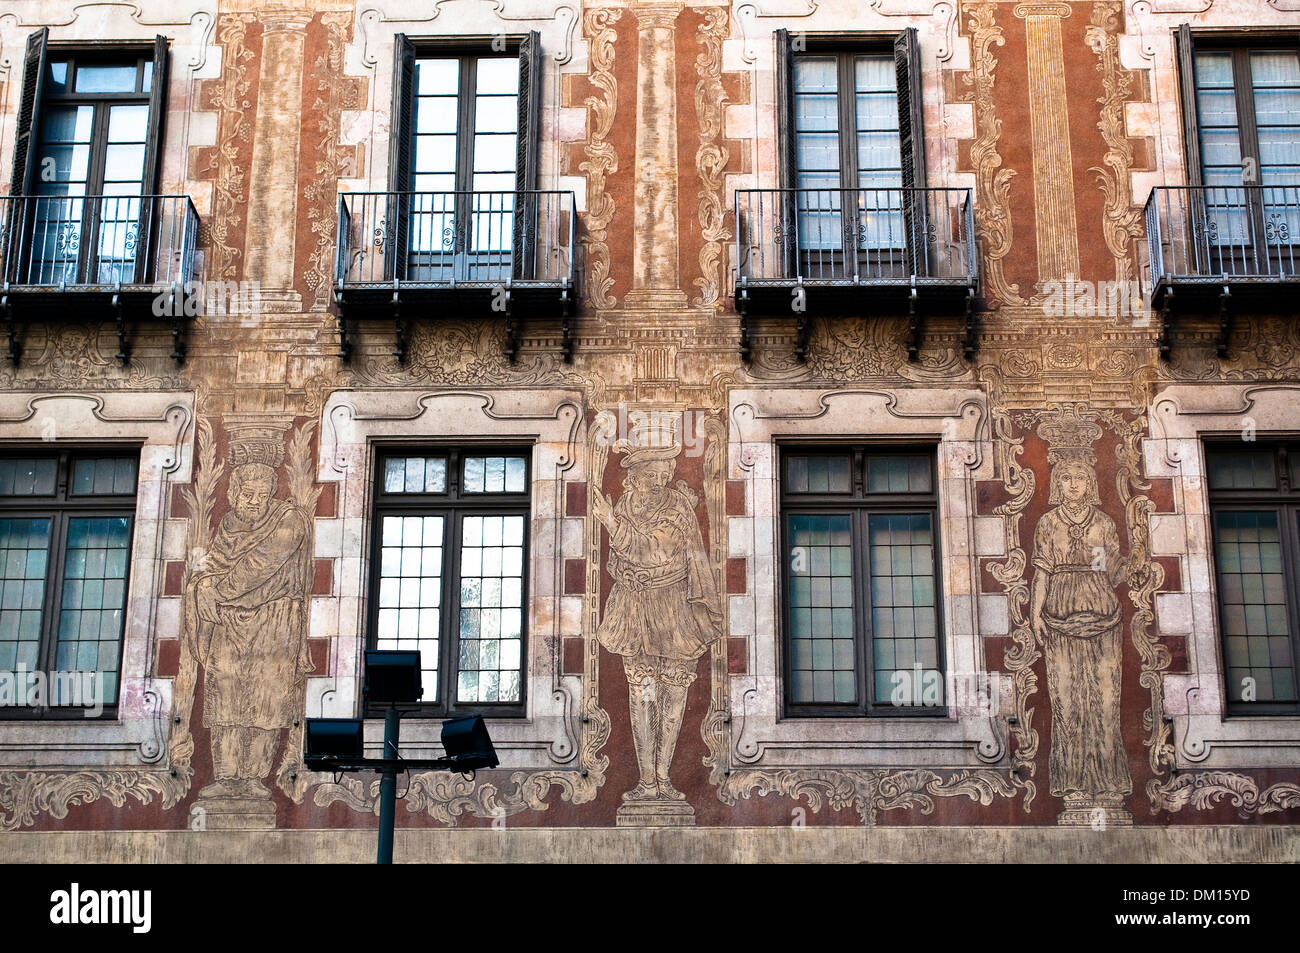 House in Via Laietana declared Architectural and Artistic monument, Barcelona, Catalonia, Spain Stock Photo